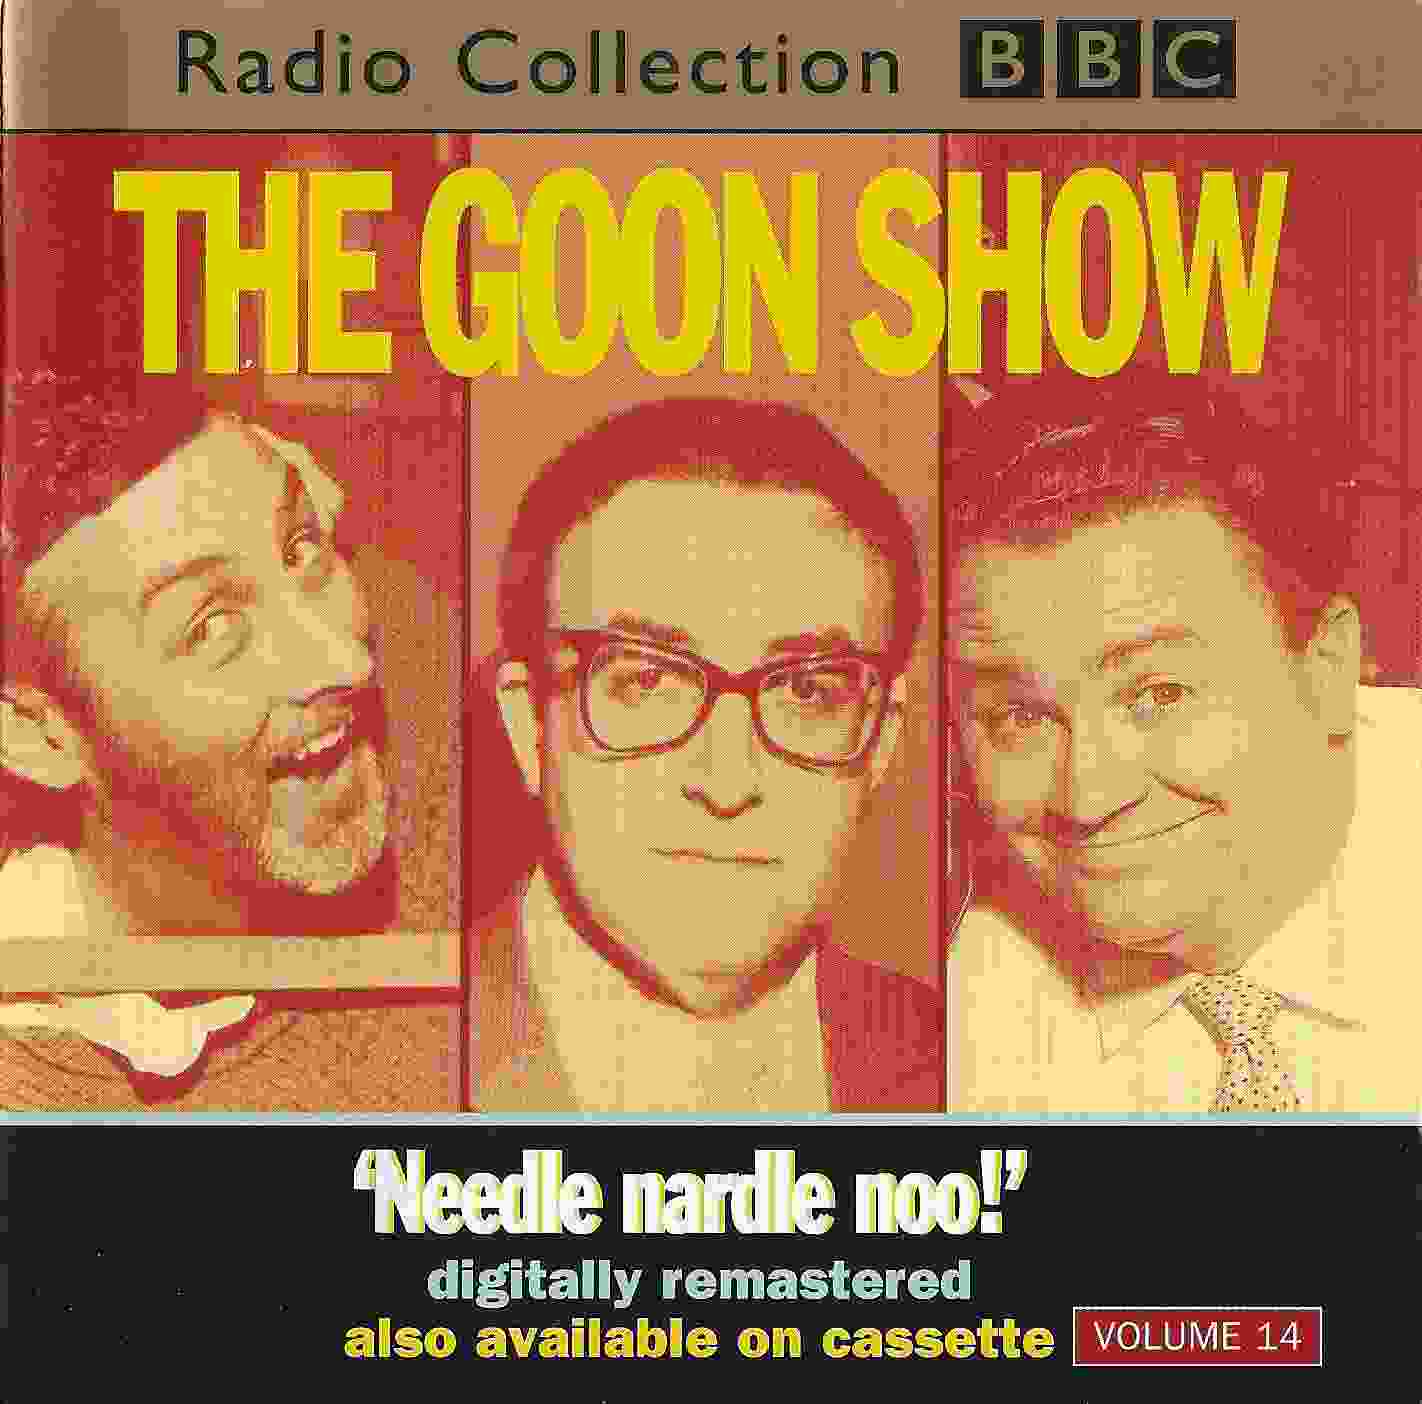 Picture of ZBBC 2115 CD The Goon show 14 - Needle nardle noo! by artist Spike Milligan from the BBC cds - Records and Tapes library